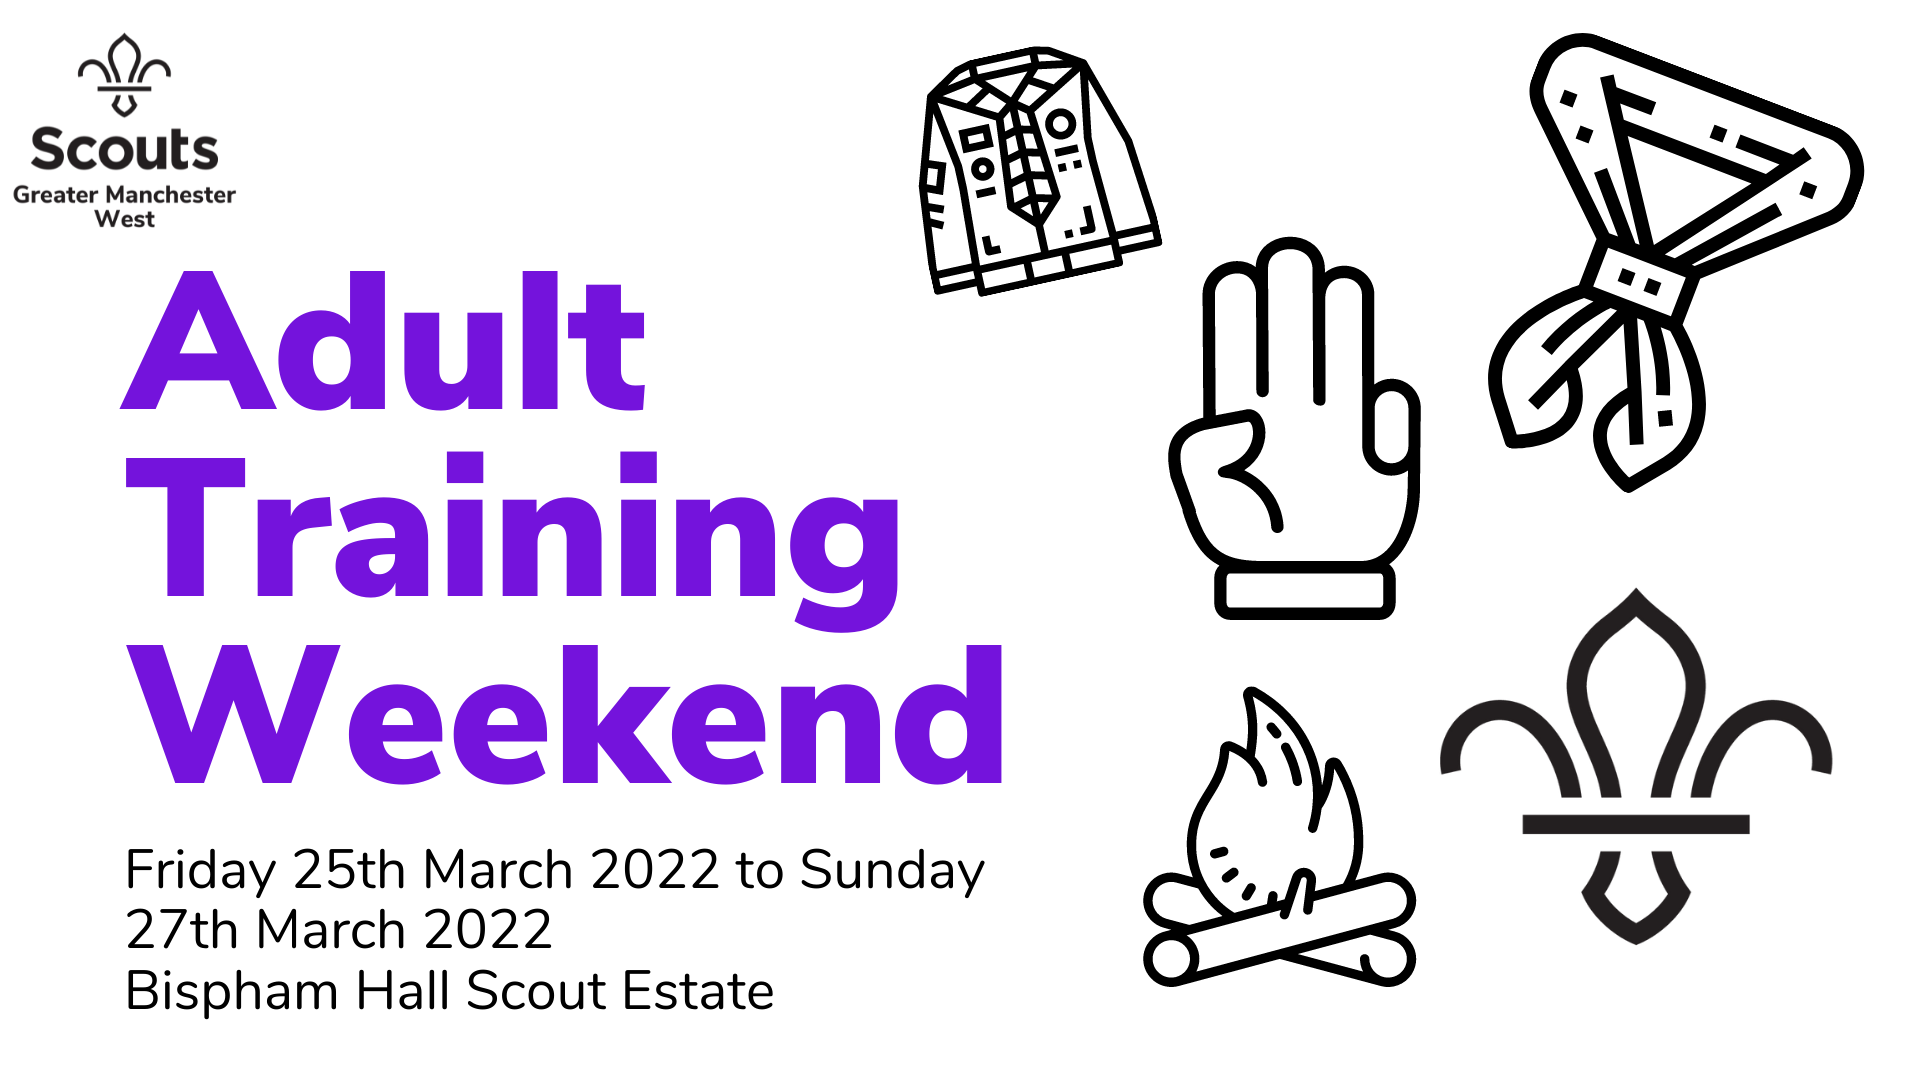 Event image for adult training weekend weekend of March 25th at Bispham Hall Scout Estate